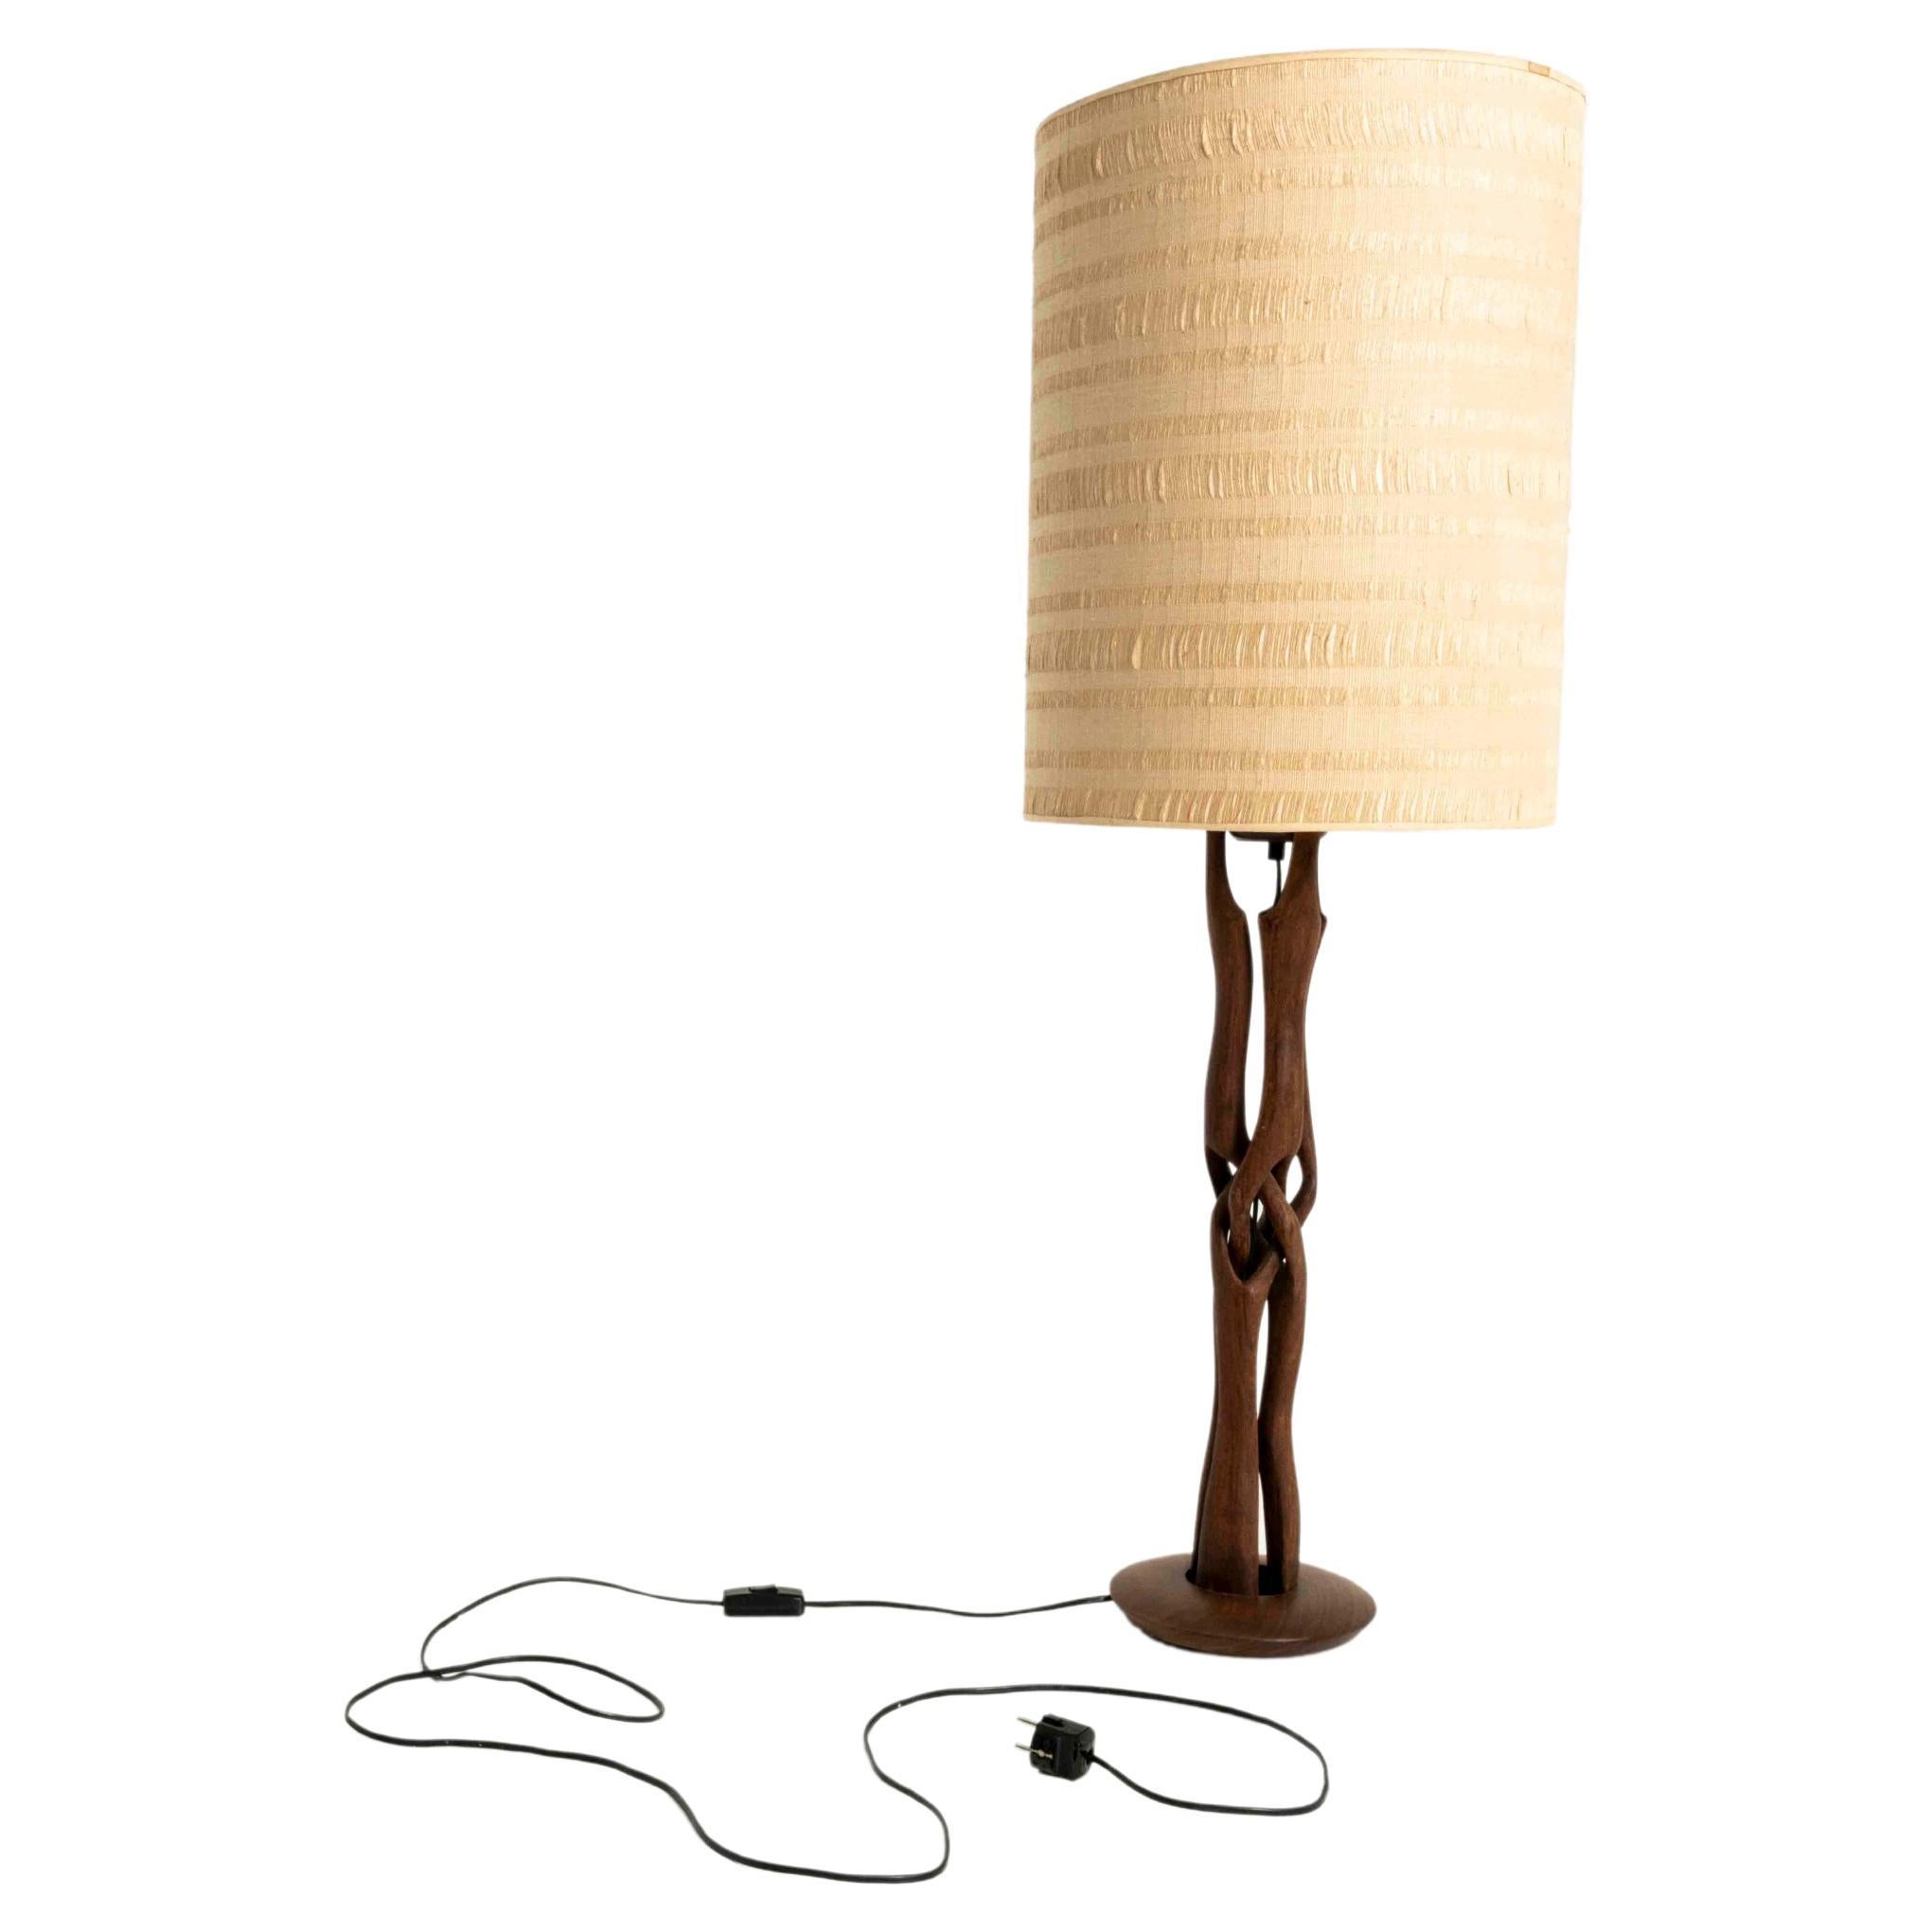 Beautiful table lamp with an abstract carved, wooden base. The lamp has an off-white lamp hood, which gives it a very nice contrast with the warm wood of the base. The lamp is in good condition with some small wear and tear on the hood of the lamp.